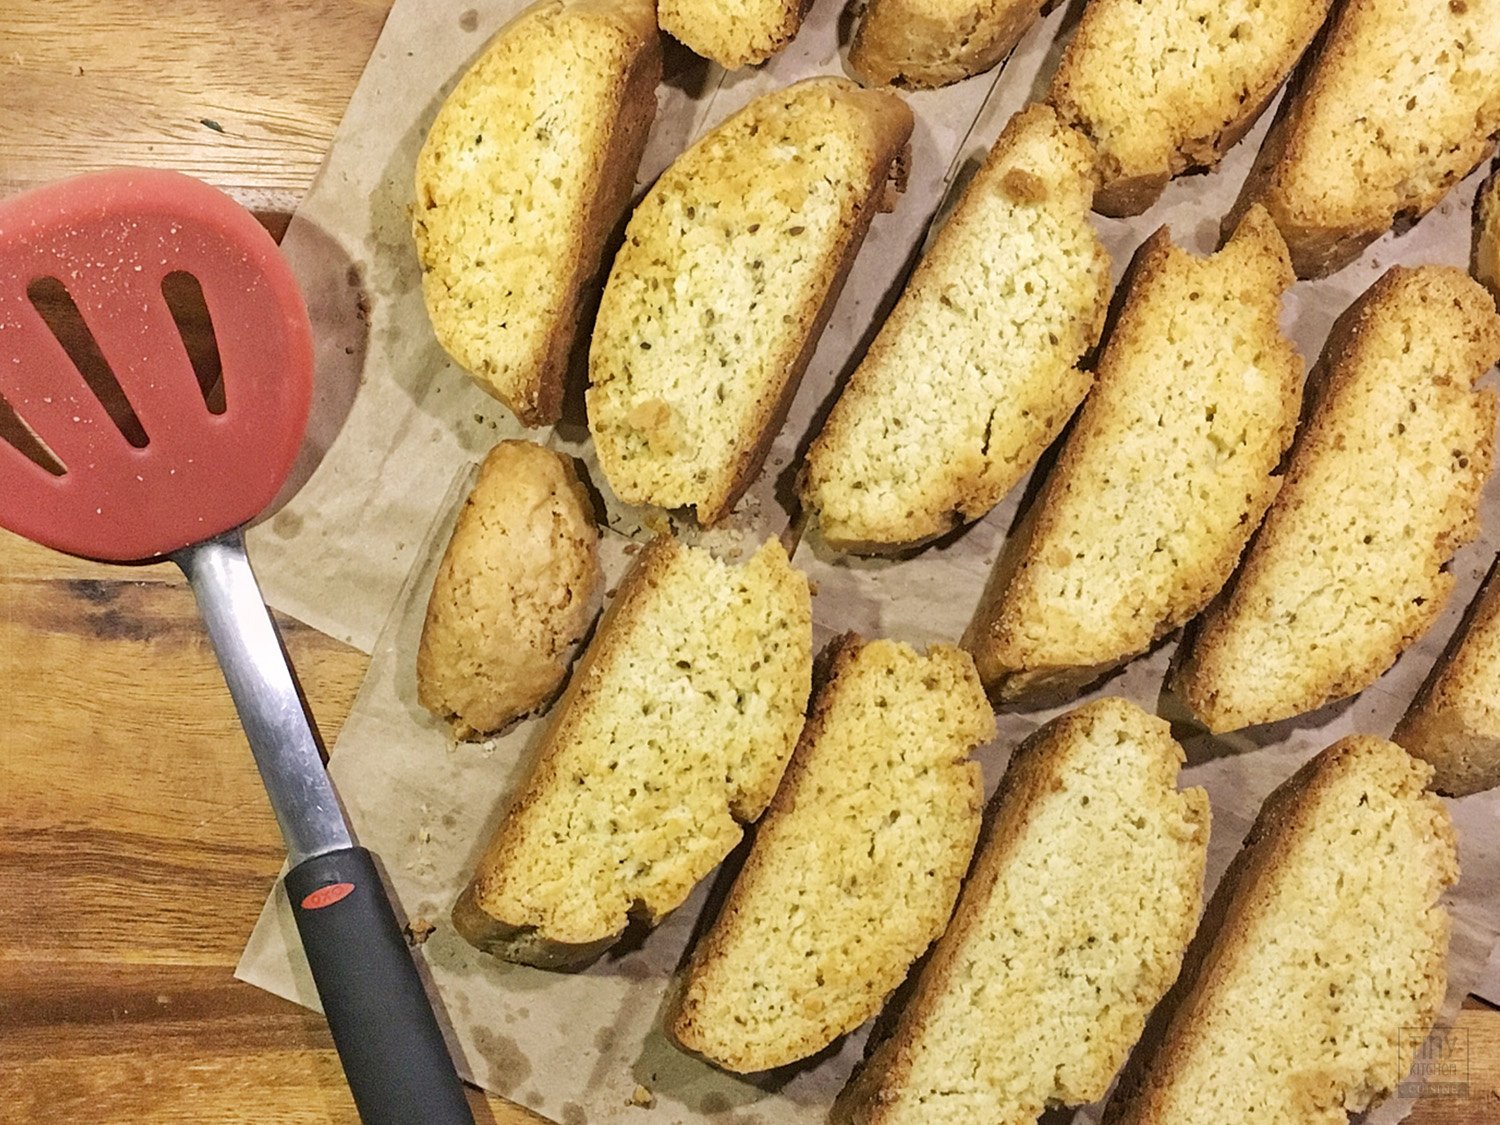 These italian anise biscotti are thick crunchy cookies with a hint of licorice flavor. Best served with a cup of coffee! | Tiny Kitchen Cuisine | http://tiny.kitchen